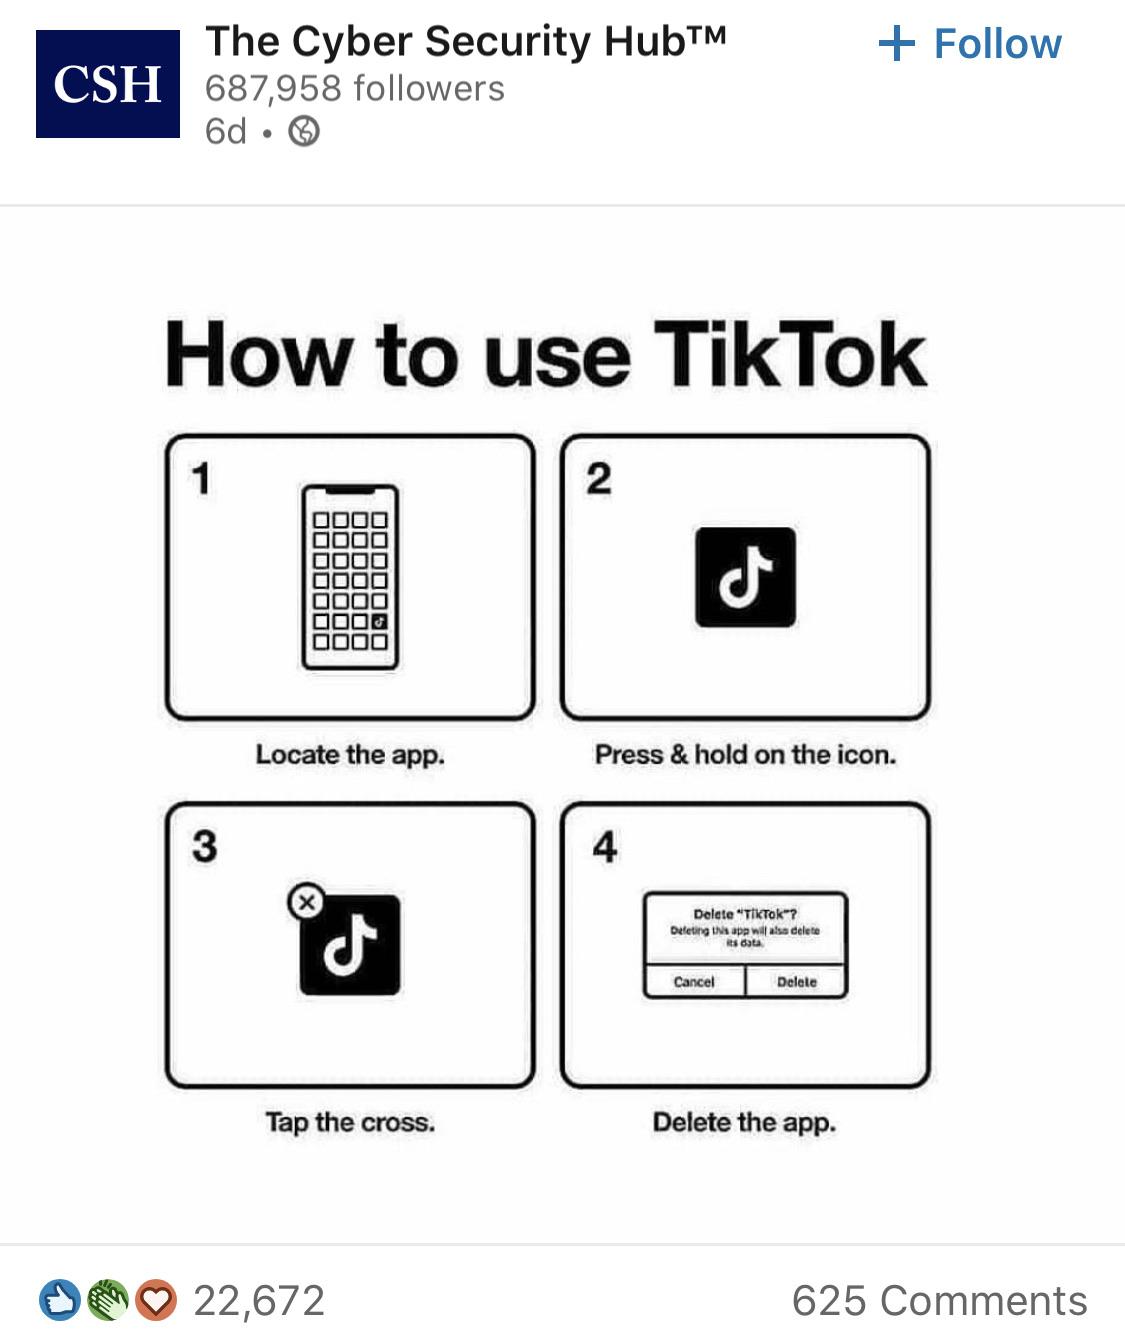 funny random pics and memes - cyber security hub tiktok - The Cyber Security Hub Csh 687,958 ers 6d How to use TikTok 1 3 Locate the app. J Tap the cross. 22,672 2 4 d Press & hold on the icon. Delete "TikTok"? Deleting this app will also delete its data 